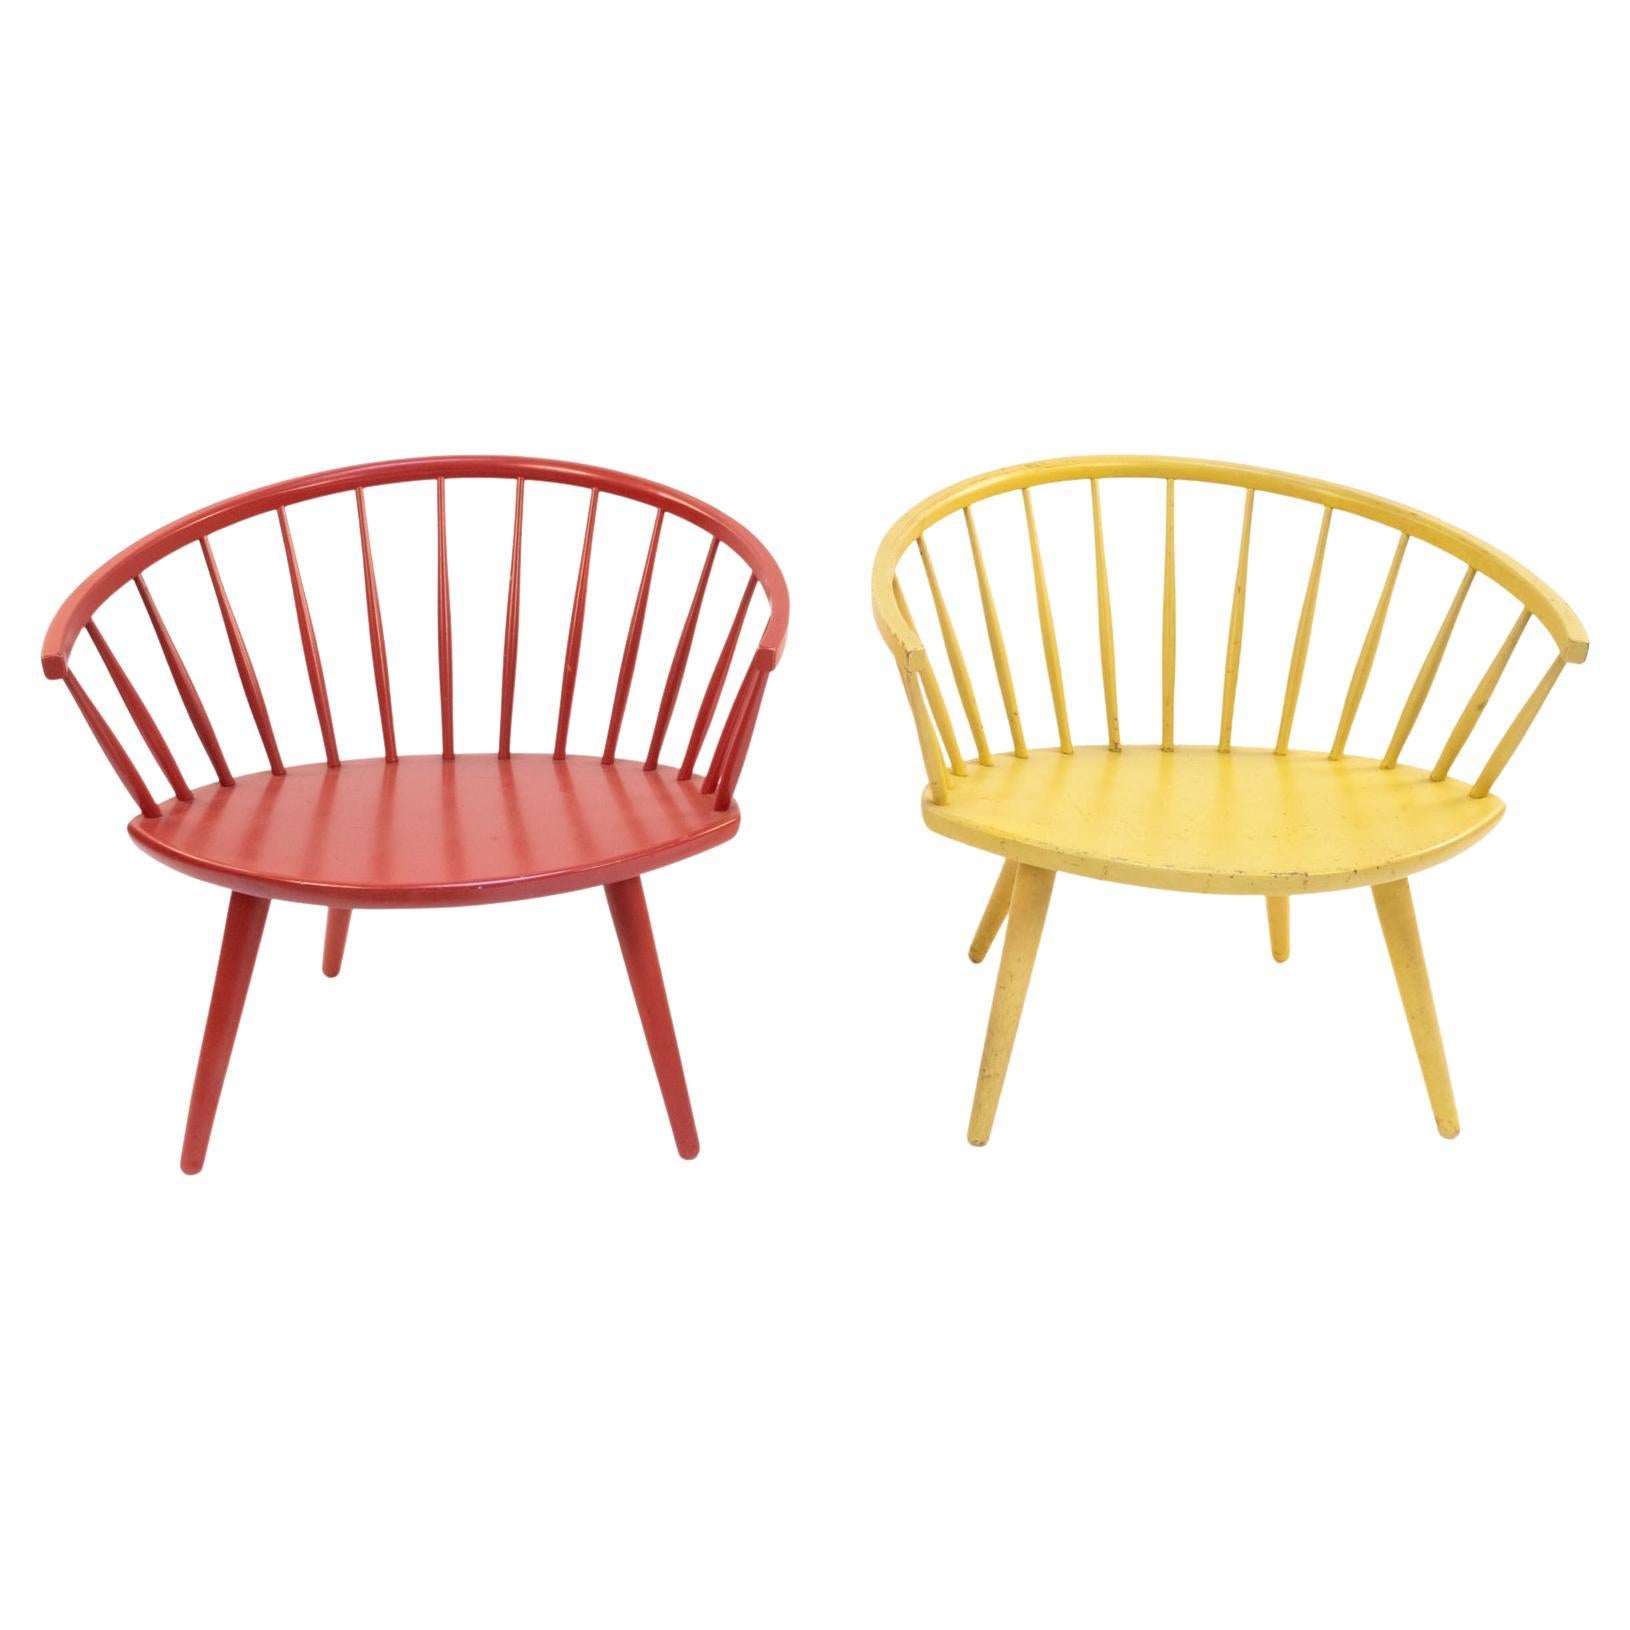 Yngve Ekström, Pair of "Arka" Chairs in Red Lacquer and Yellow Paint, circa 1955 For Sale